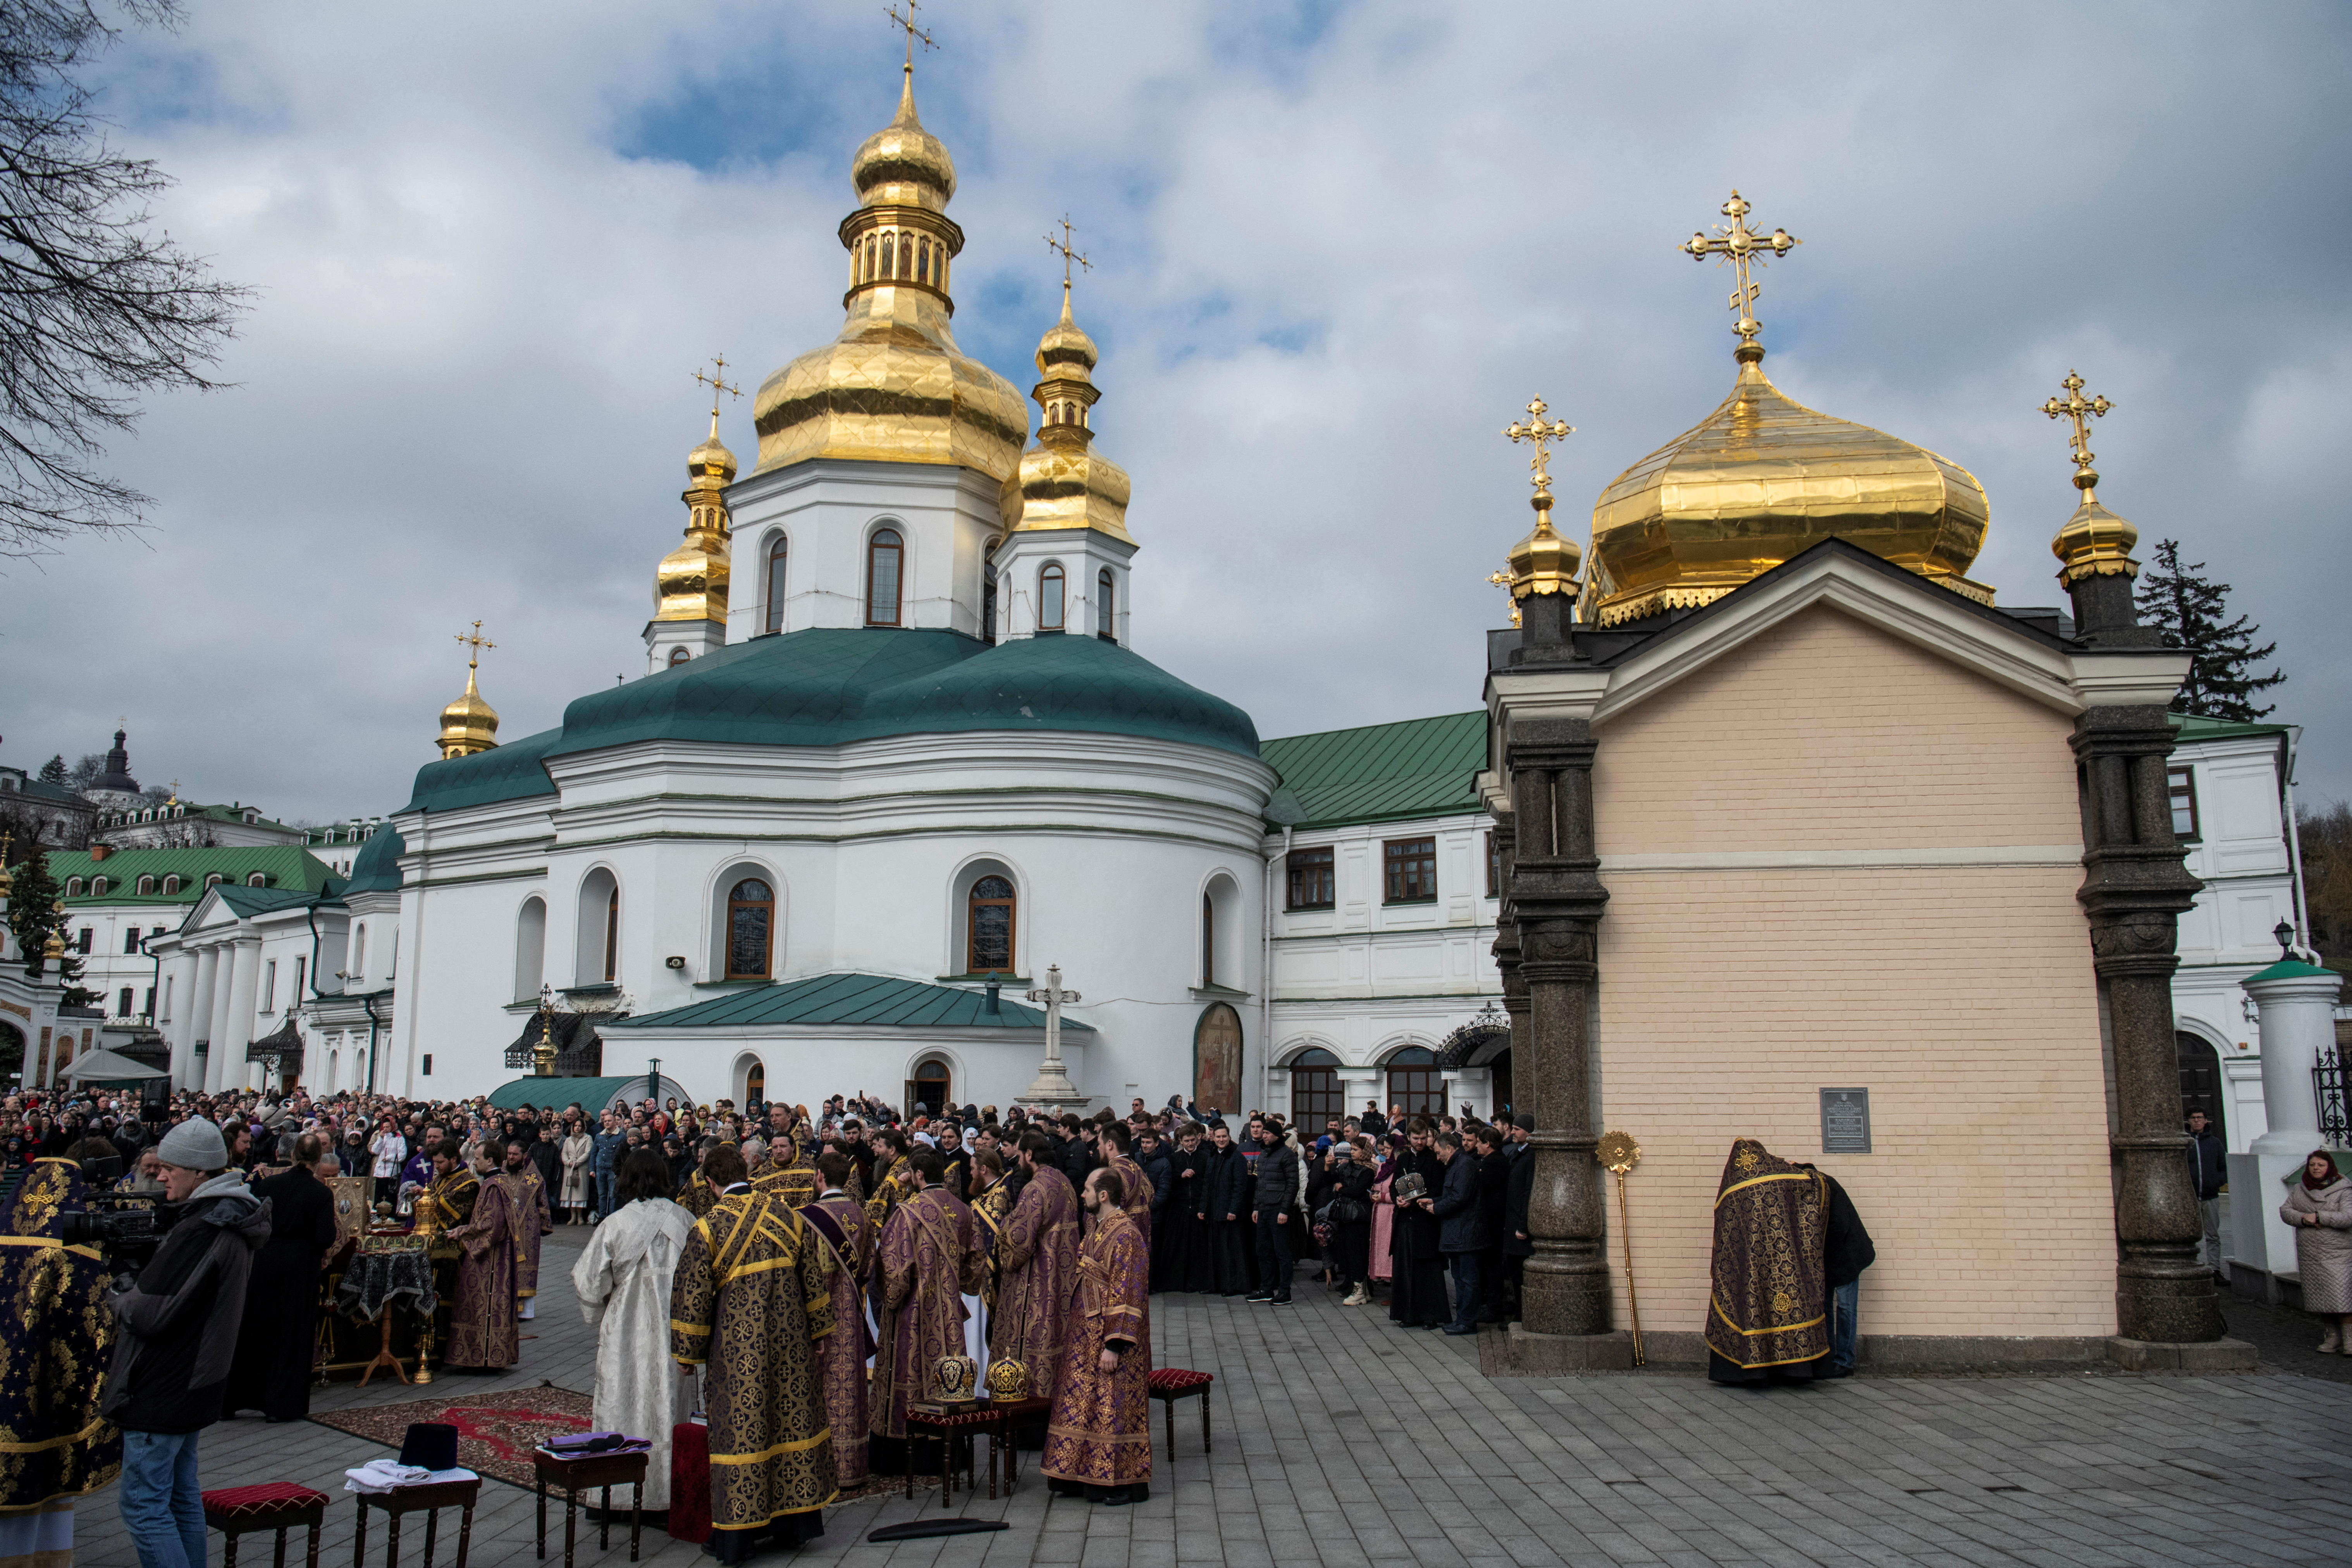 Believers attend a service led by Metropolitan Onufriy, head of the Ukrainian Orthodox Church branch loyal to Moscow, at a compound of the Kyiv Pechersk Lavra monastery in Kyiv